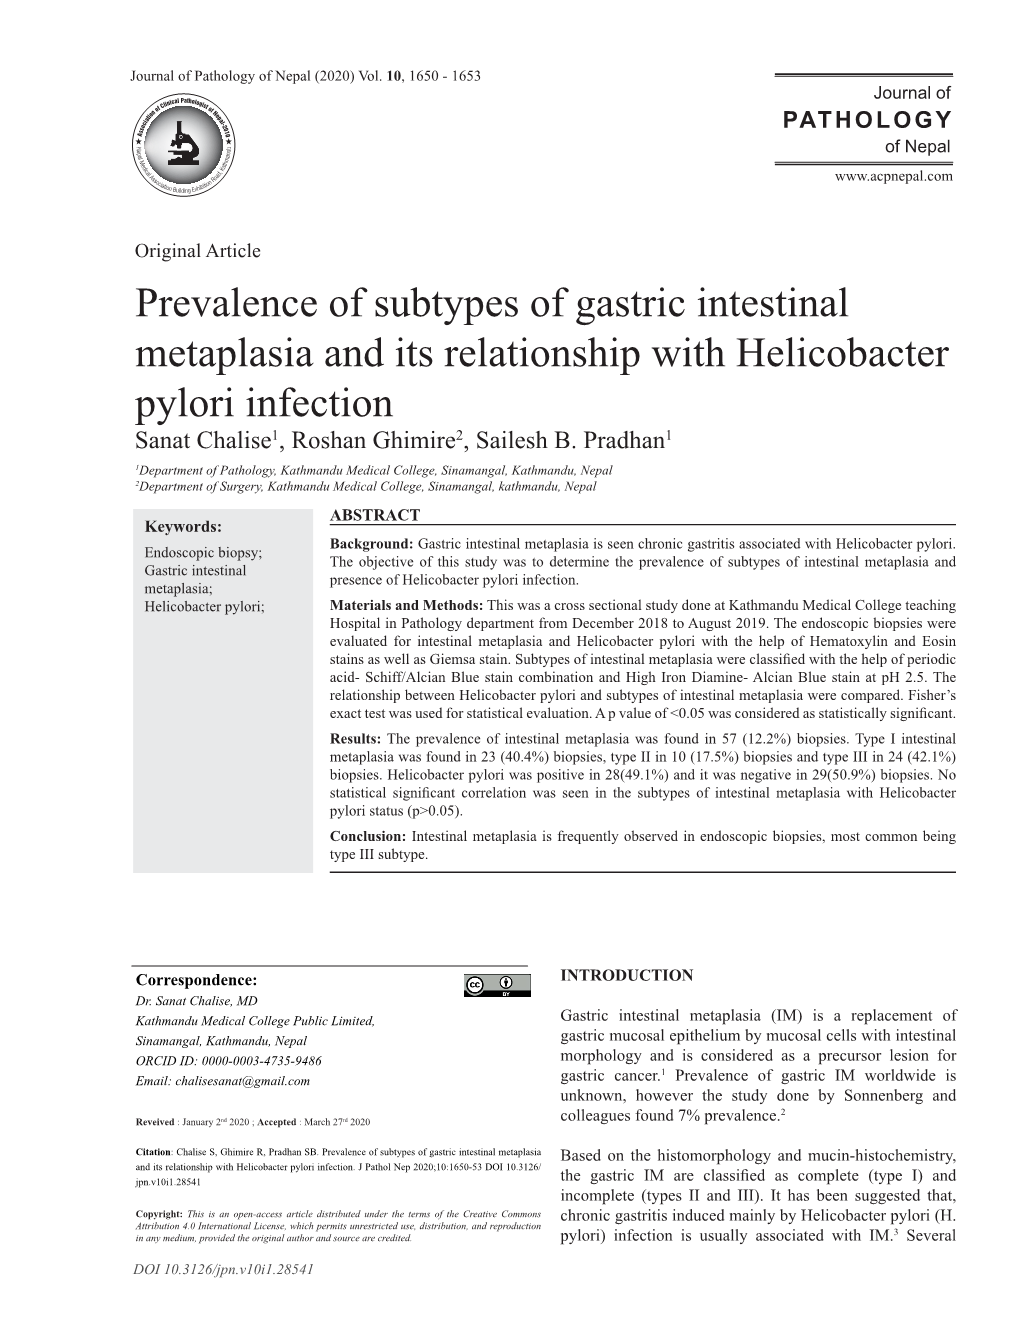 Prevalence of Subtypes of Gastric Intestinal Metaplasia and Its Relationship with Helicobacter Pylori Infection Sanat Chalise1, Roshan Ghimire2, Sailesh B